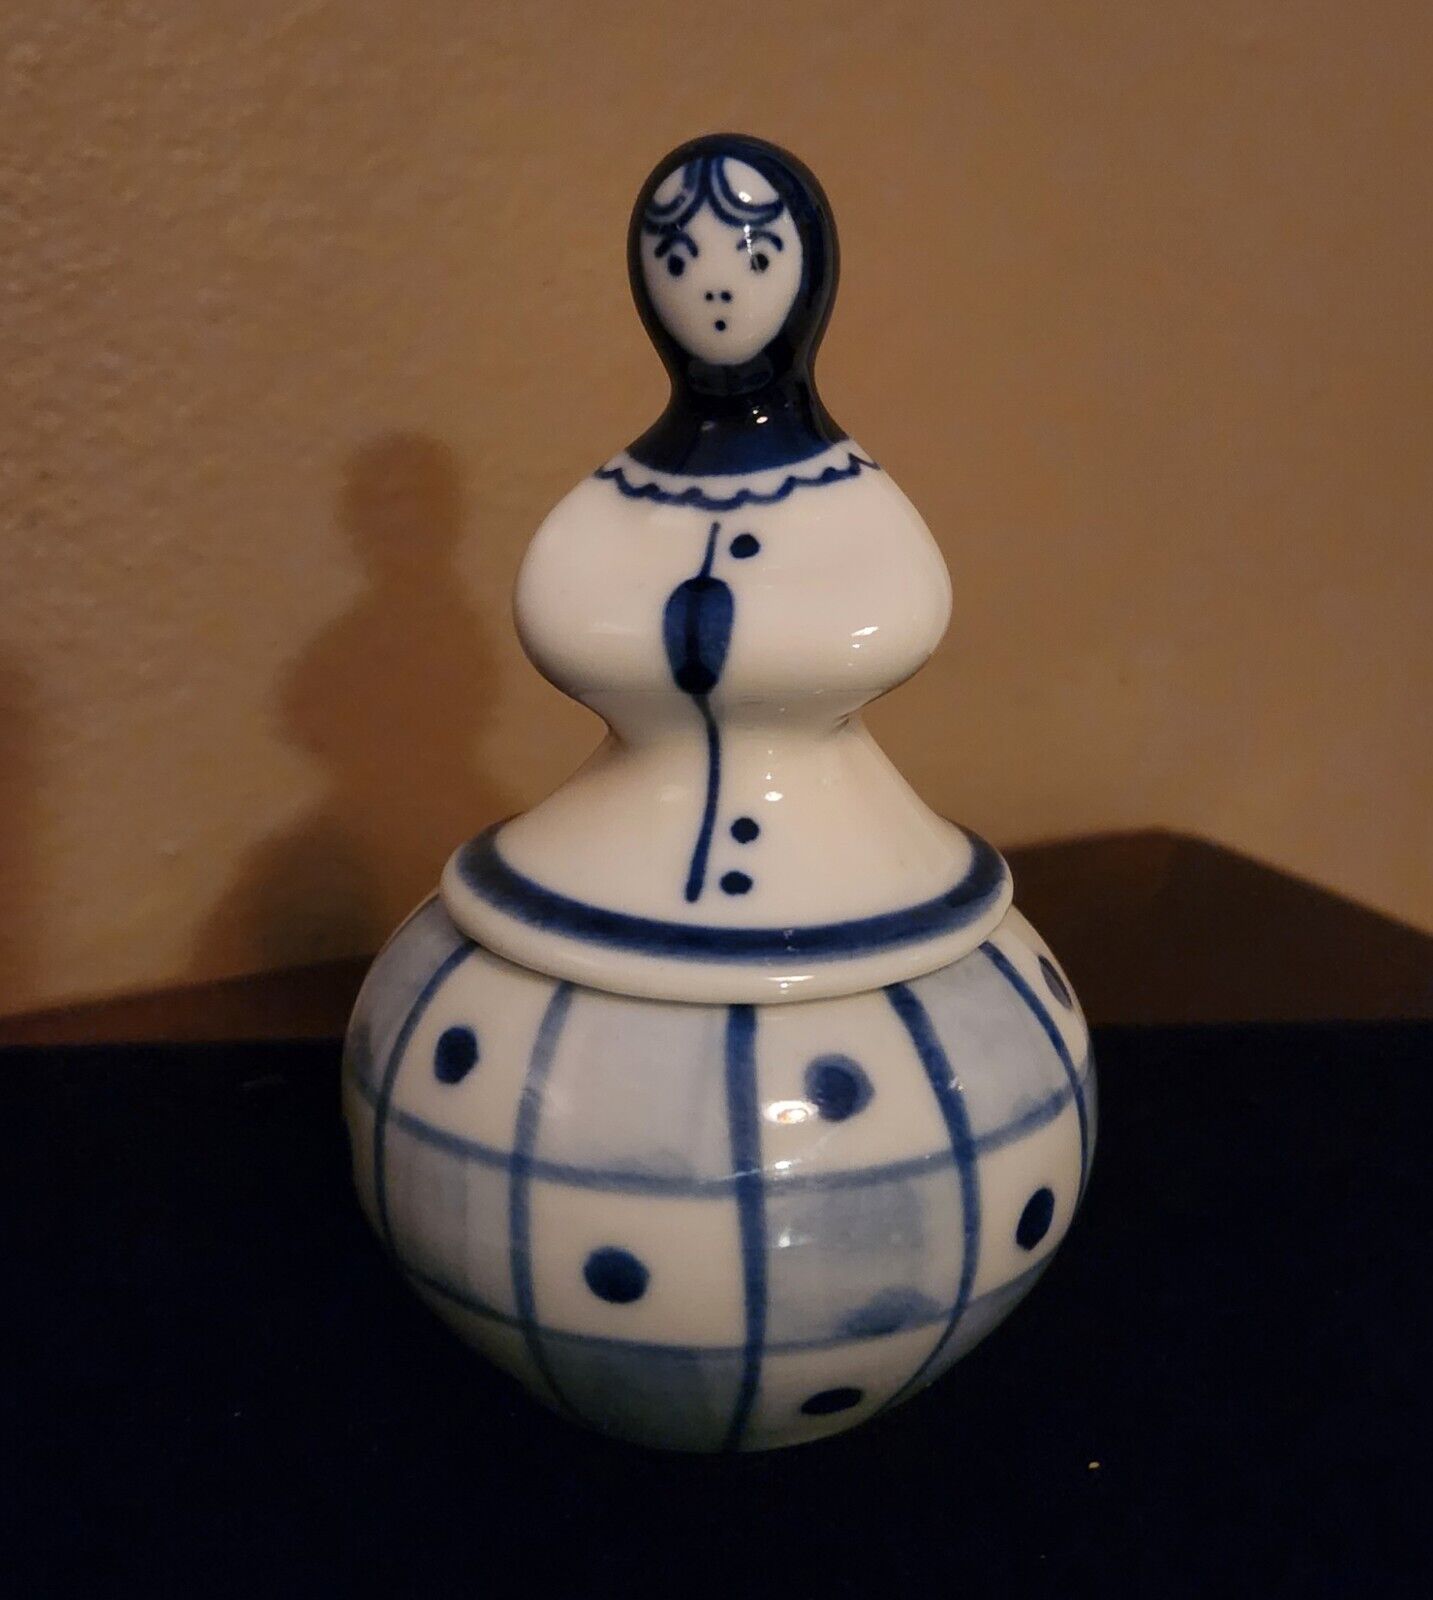 Vintage Gzhel Blue & White Porcelain Figurine- Hand Painted, Made in USSR